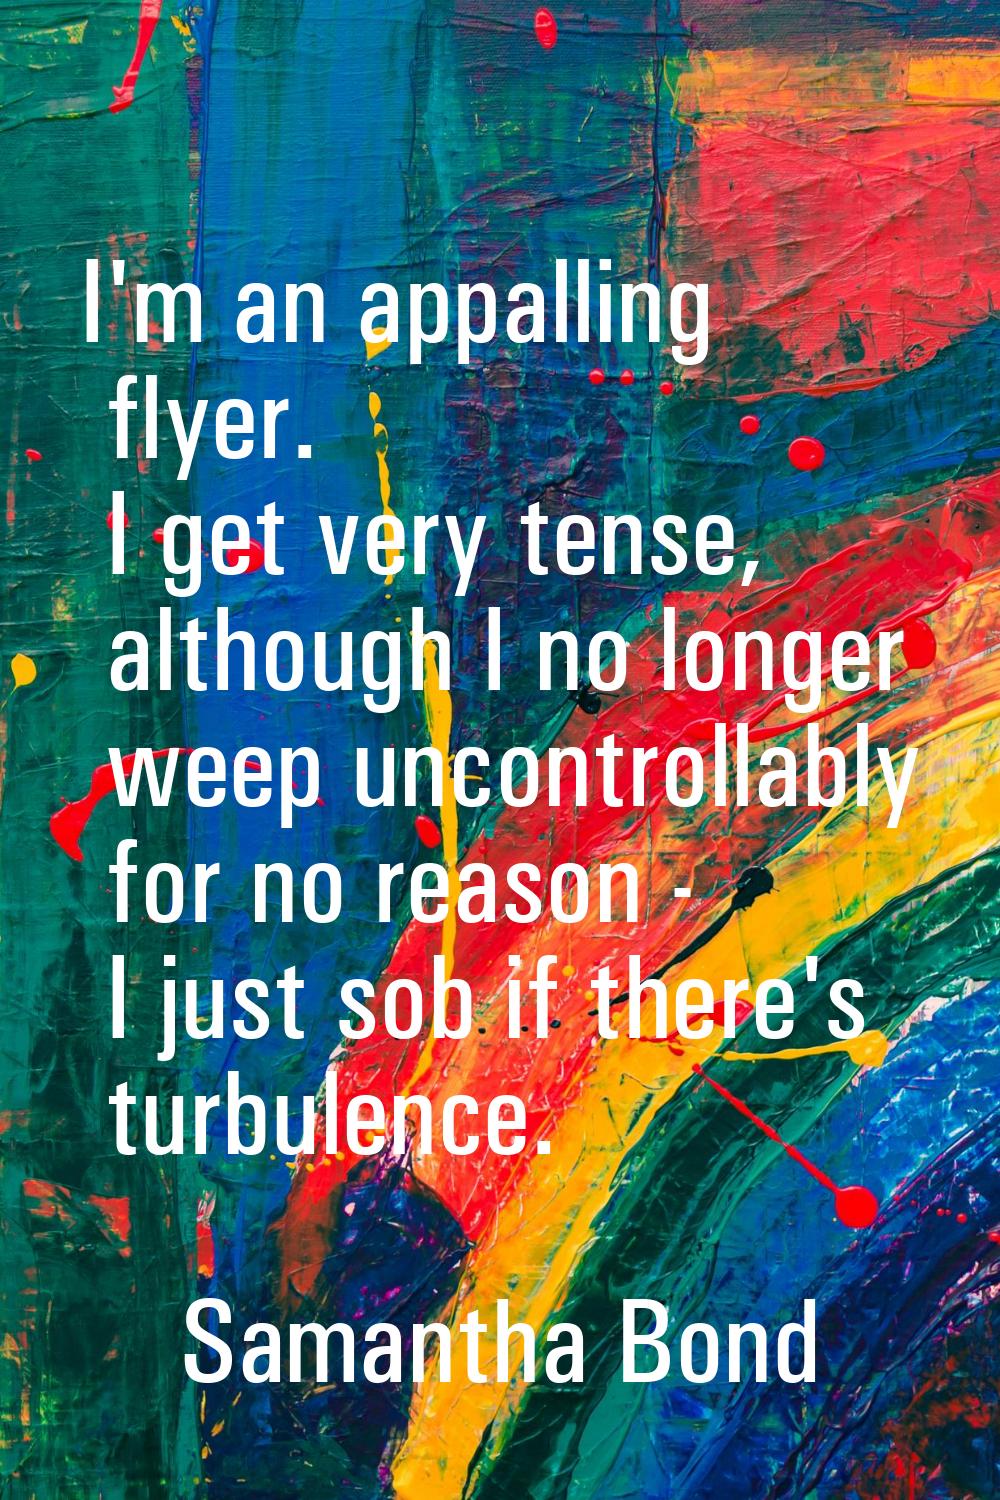 I'm an appalling flyer. I get very tense, although I no longer weep uncontrollably for no reason - 